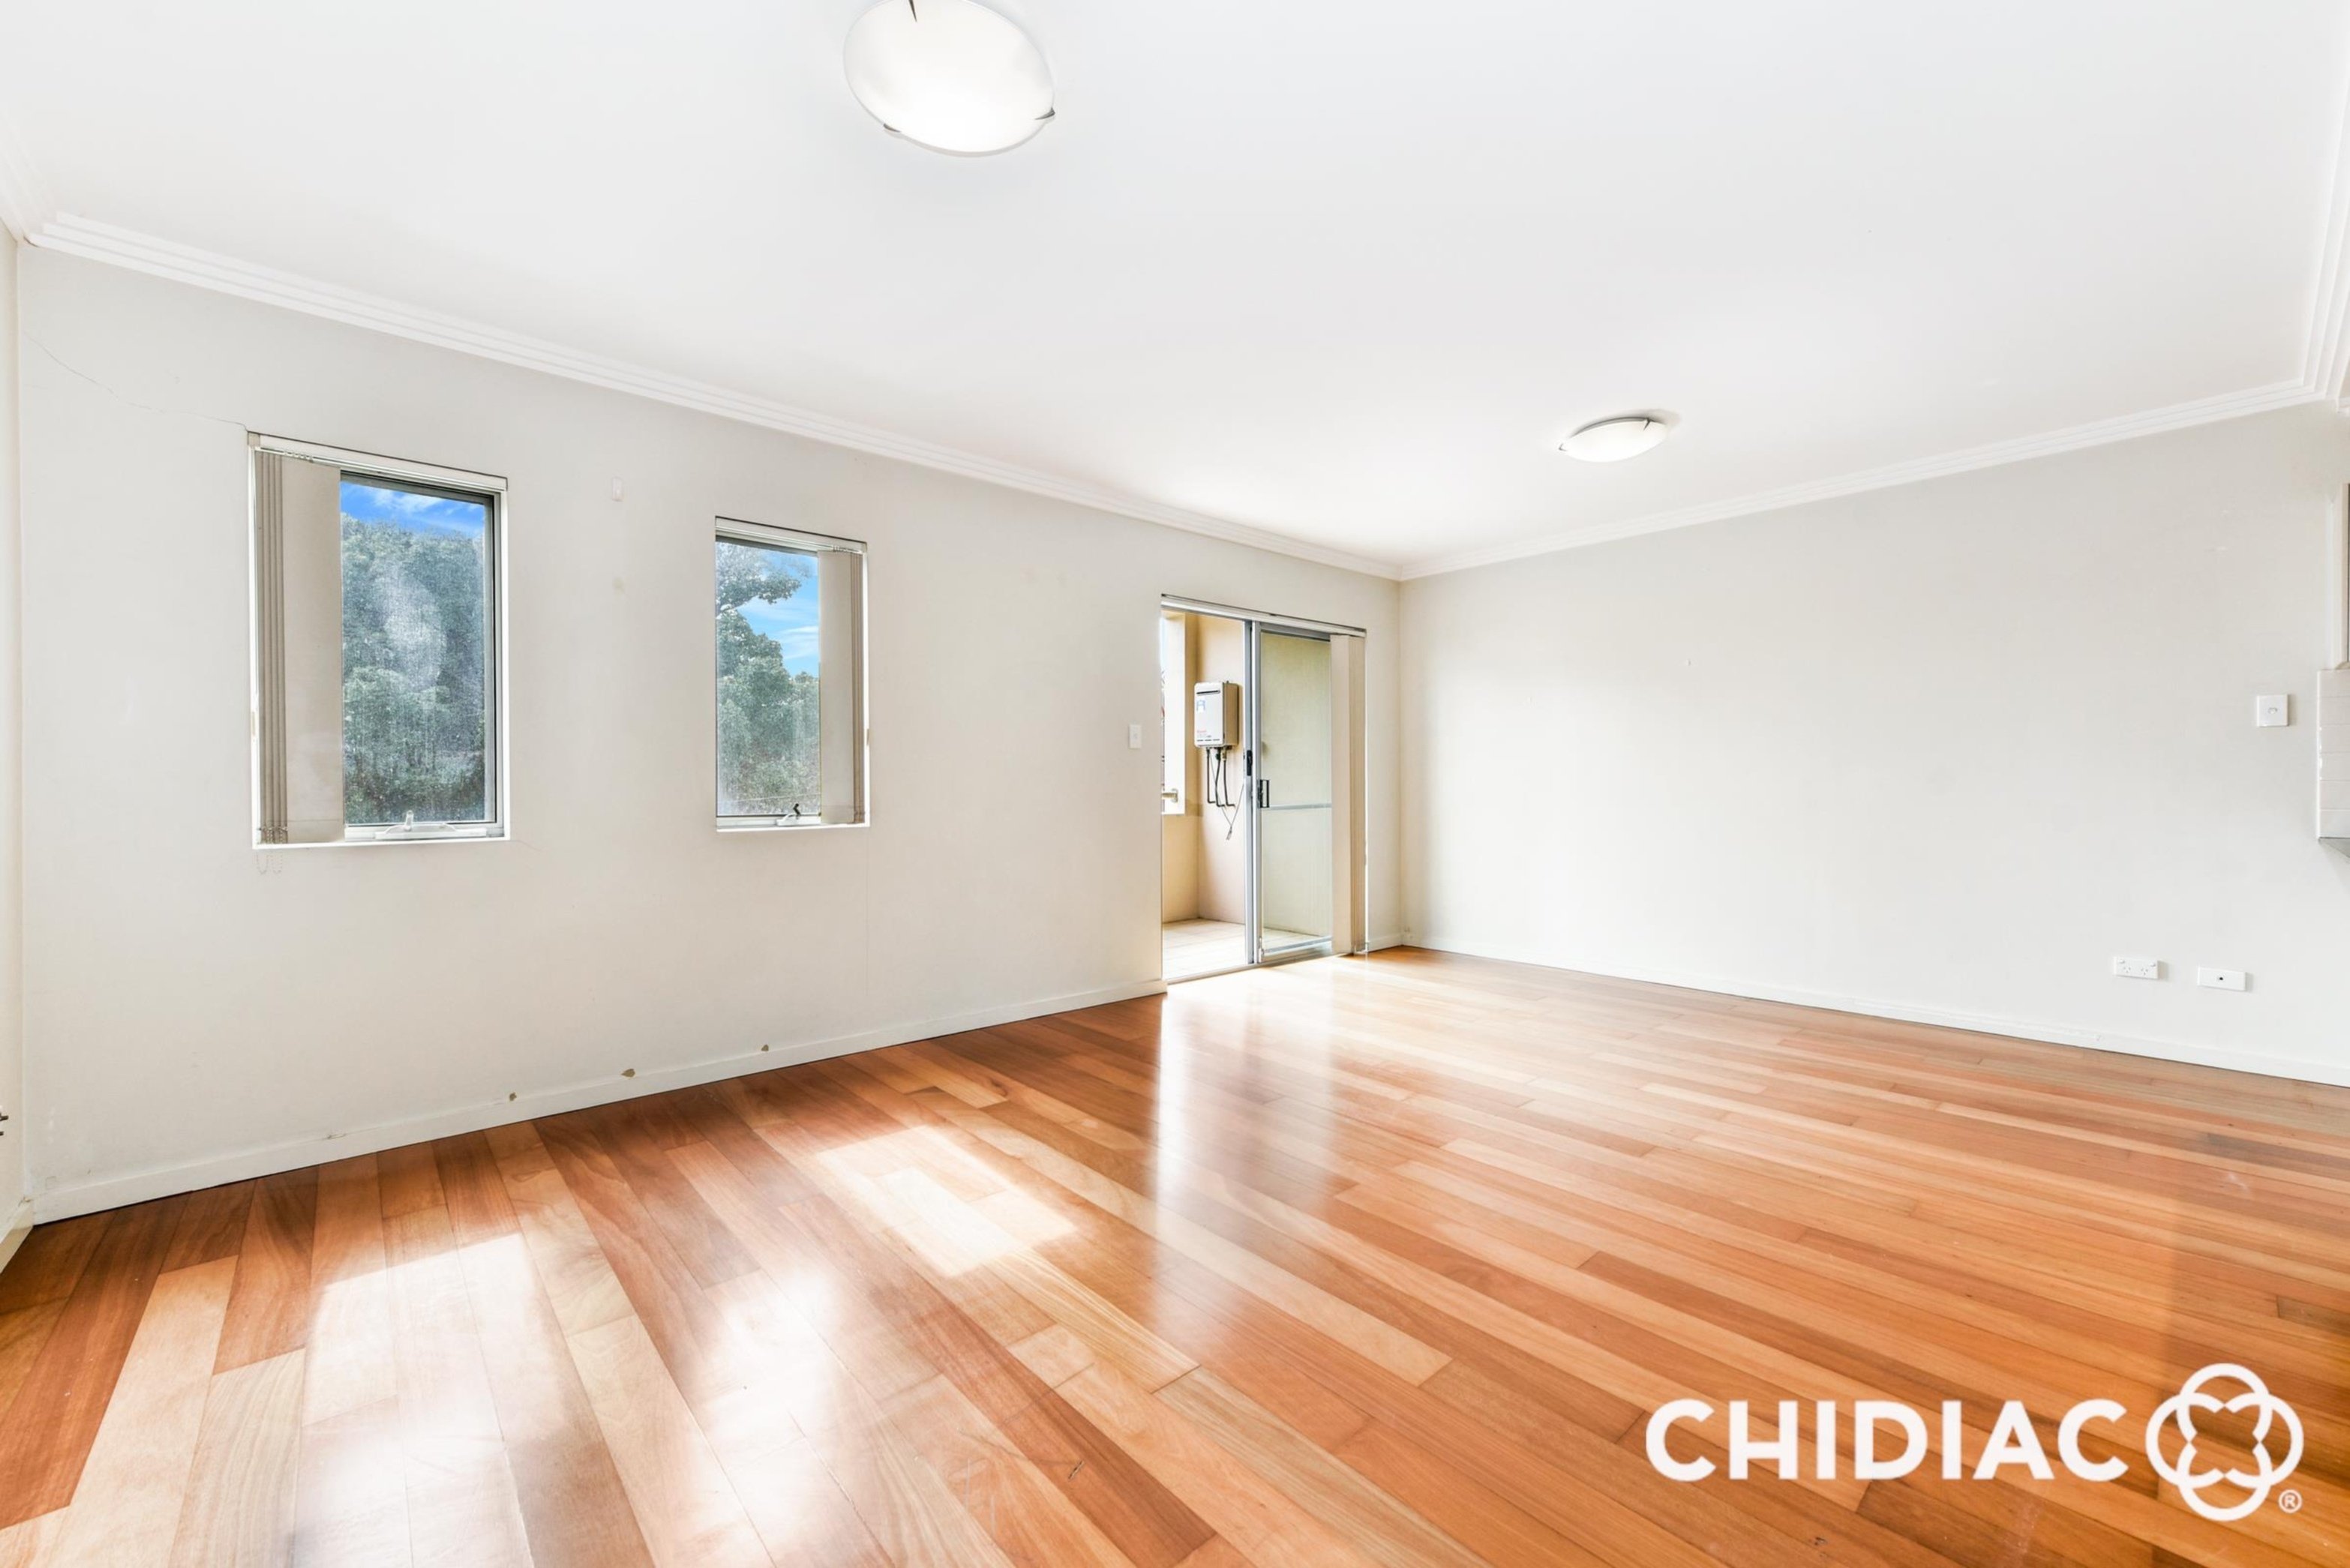 20/342A Marrickville Road, Marrickville Leased by Chidiac Realty - image 1